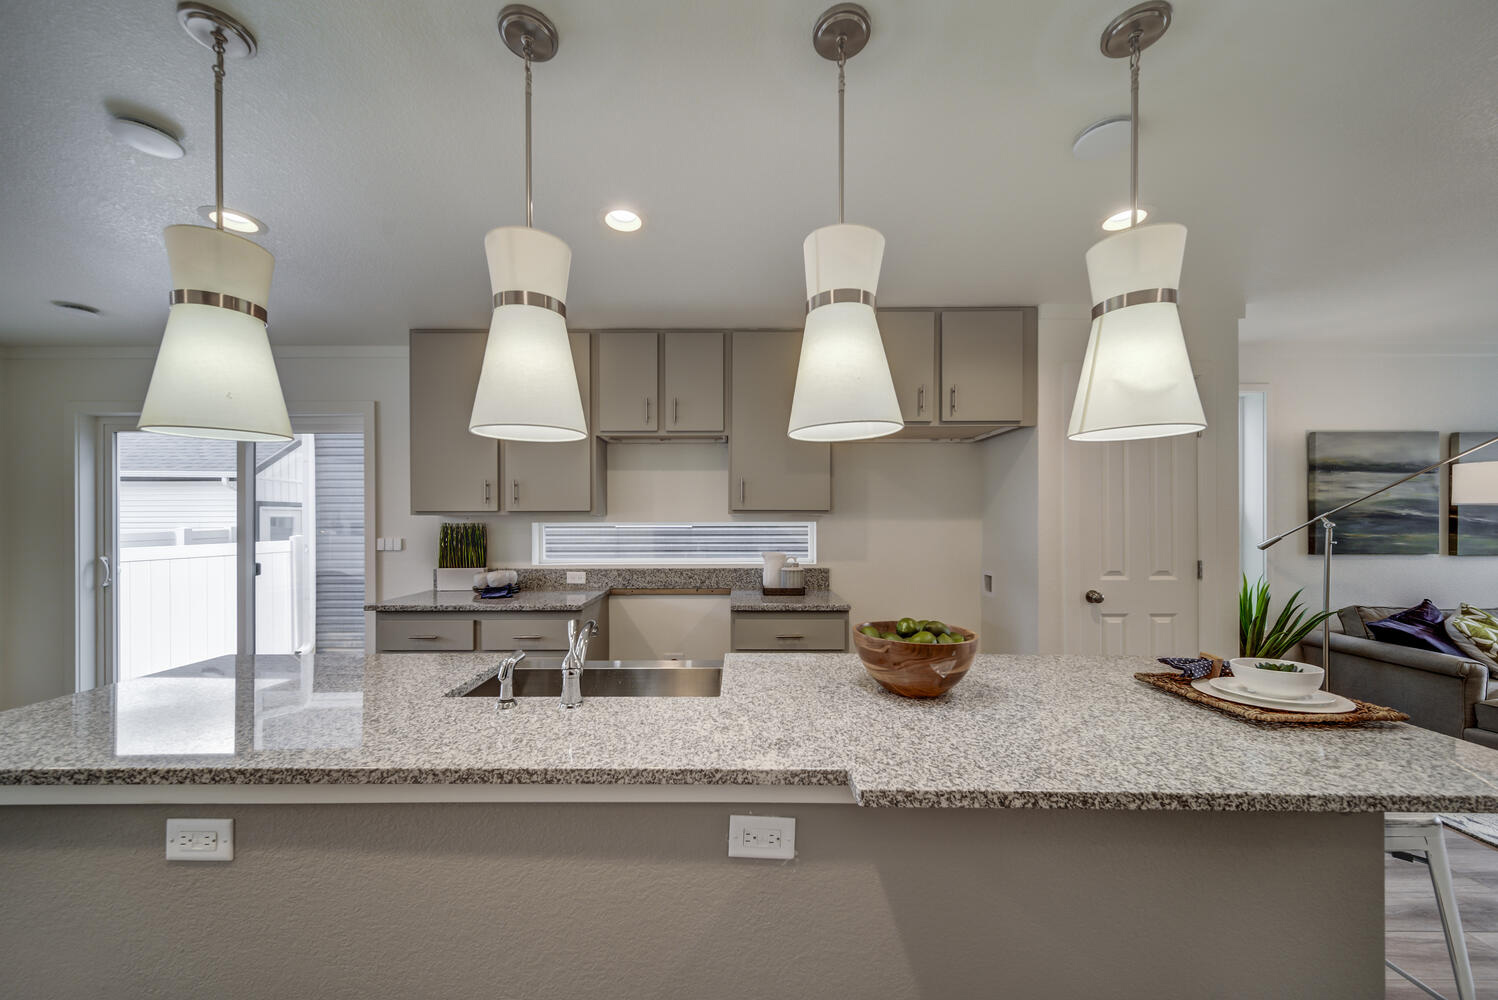 On2 Homes feature spacious kitchens with beautiful cabinetry and stone surfaces.